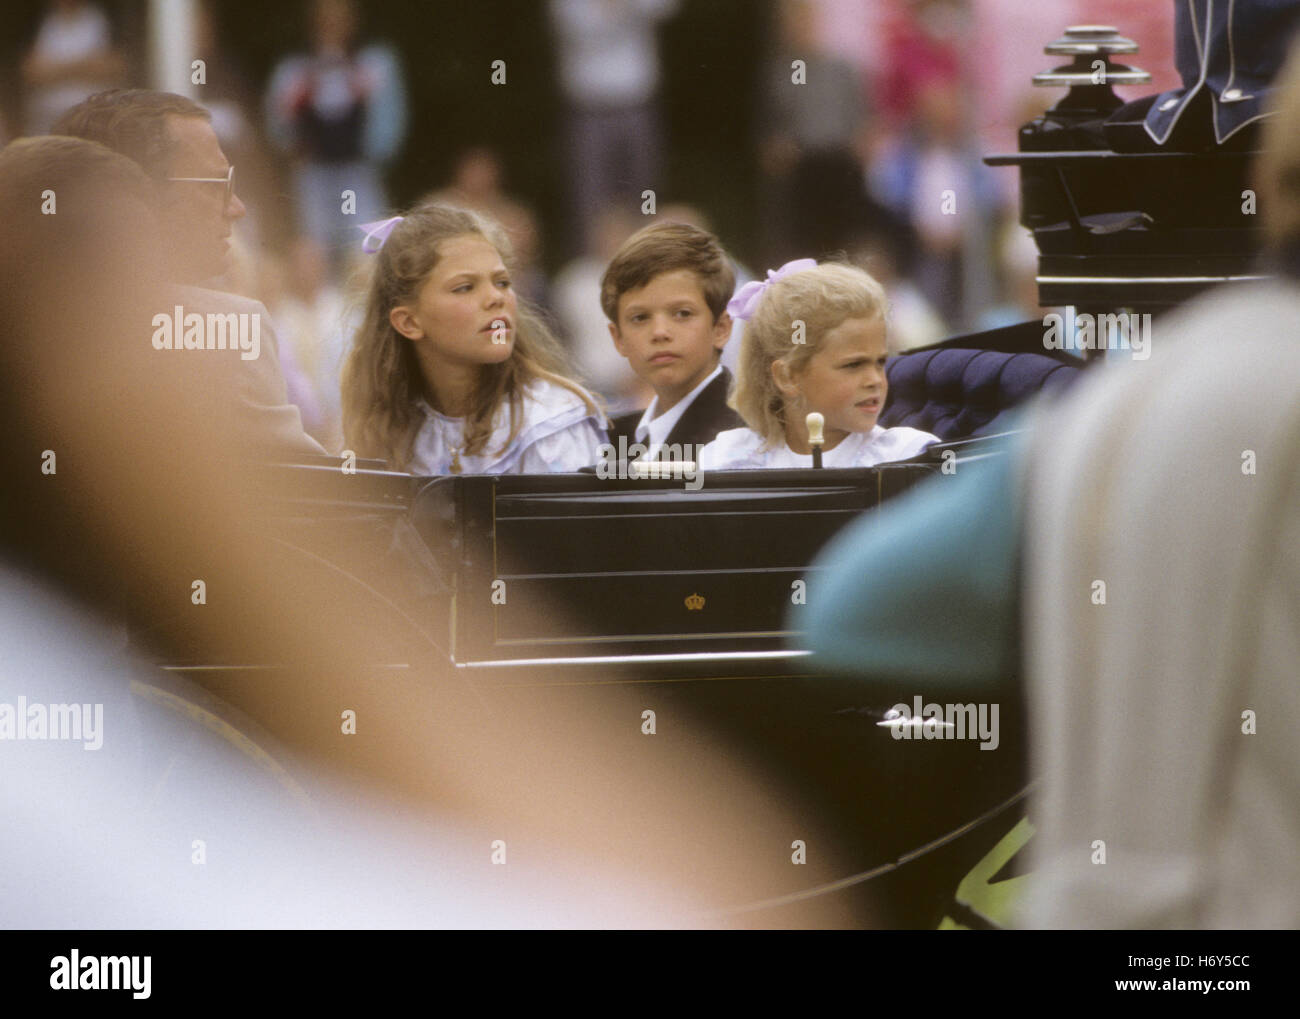 crown-princess-victoria-with-siblings-on-their-way-in-carriage-to-H6Y5CC.jpg